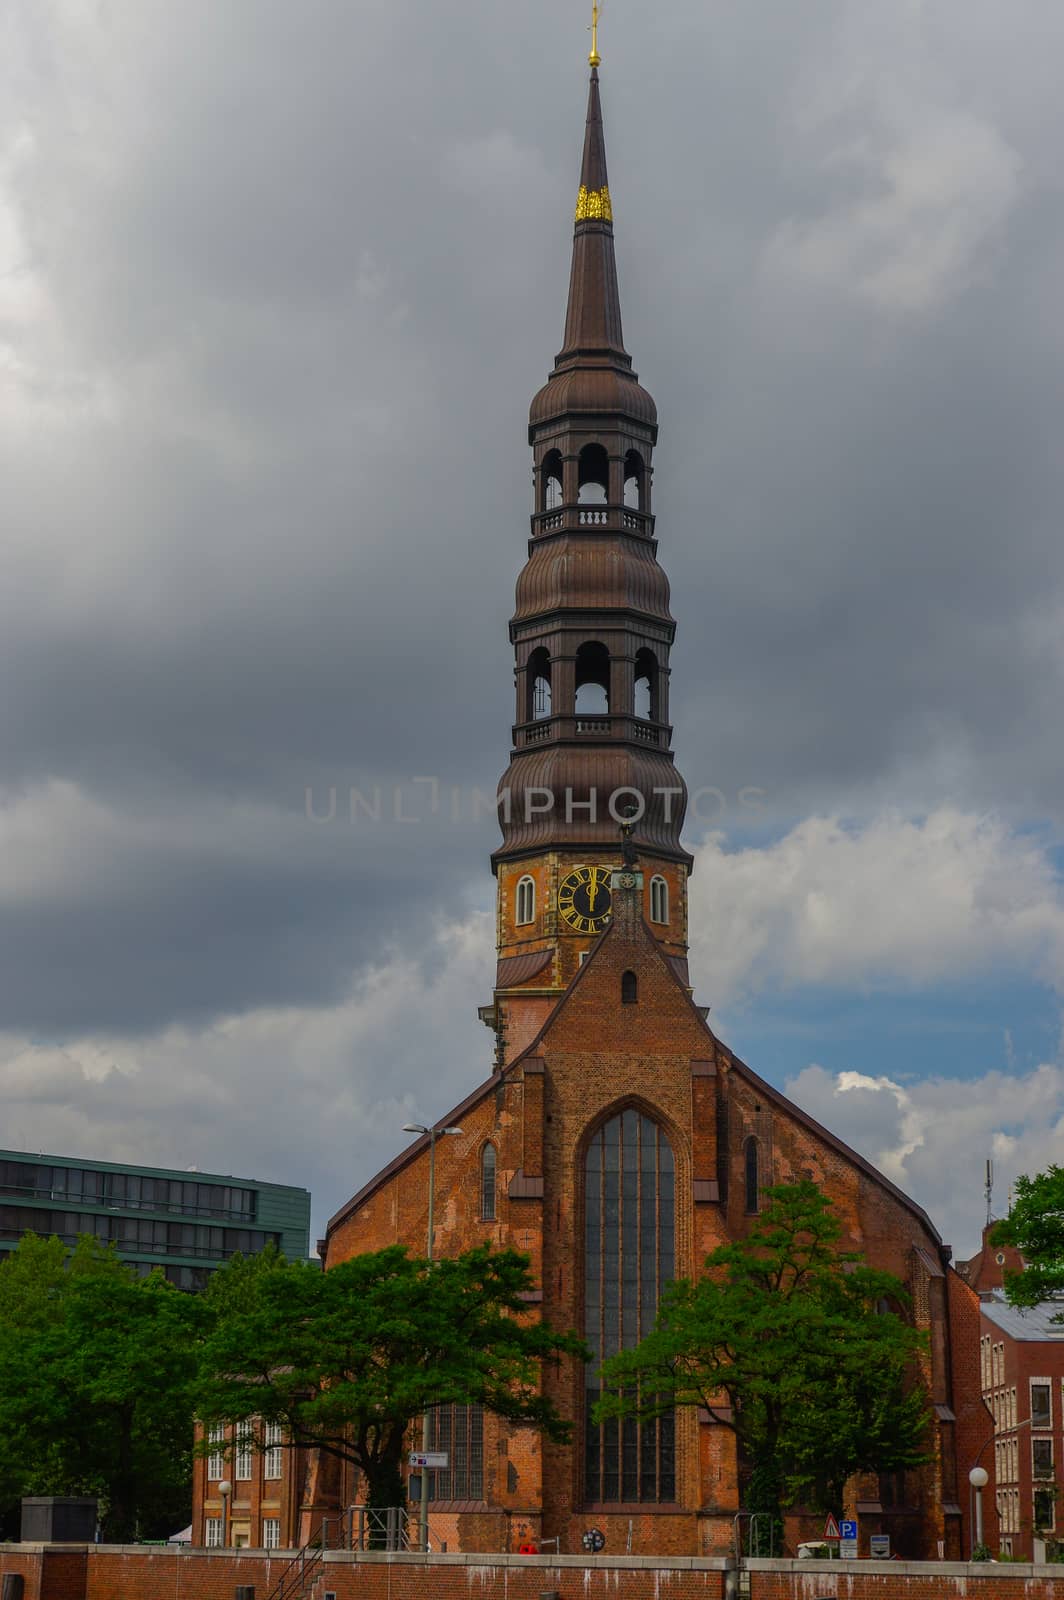 Hamburg, Germany - July 18, 2016: Warehouse District or Speicherstadt with old Church on the elb river at cloudy day.